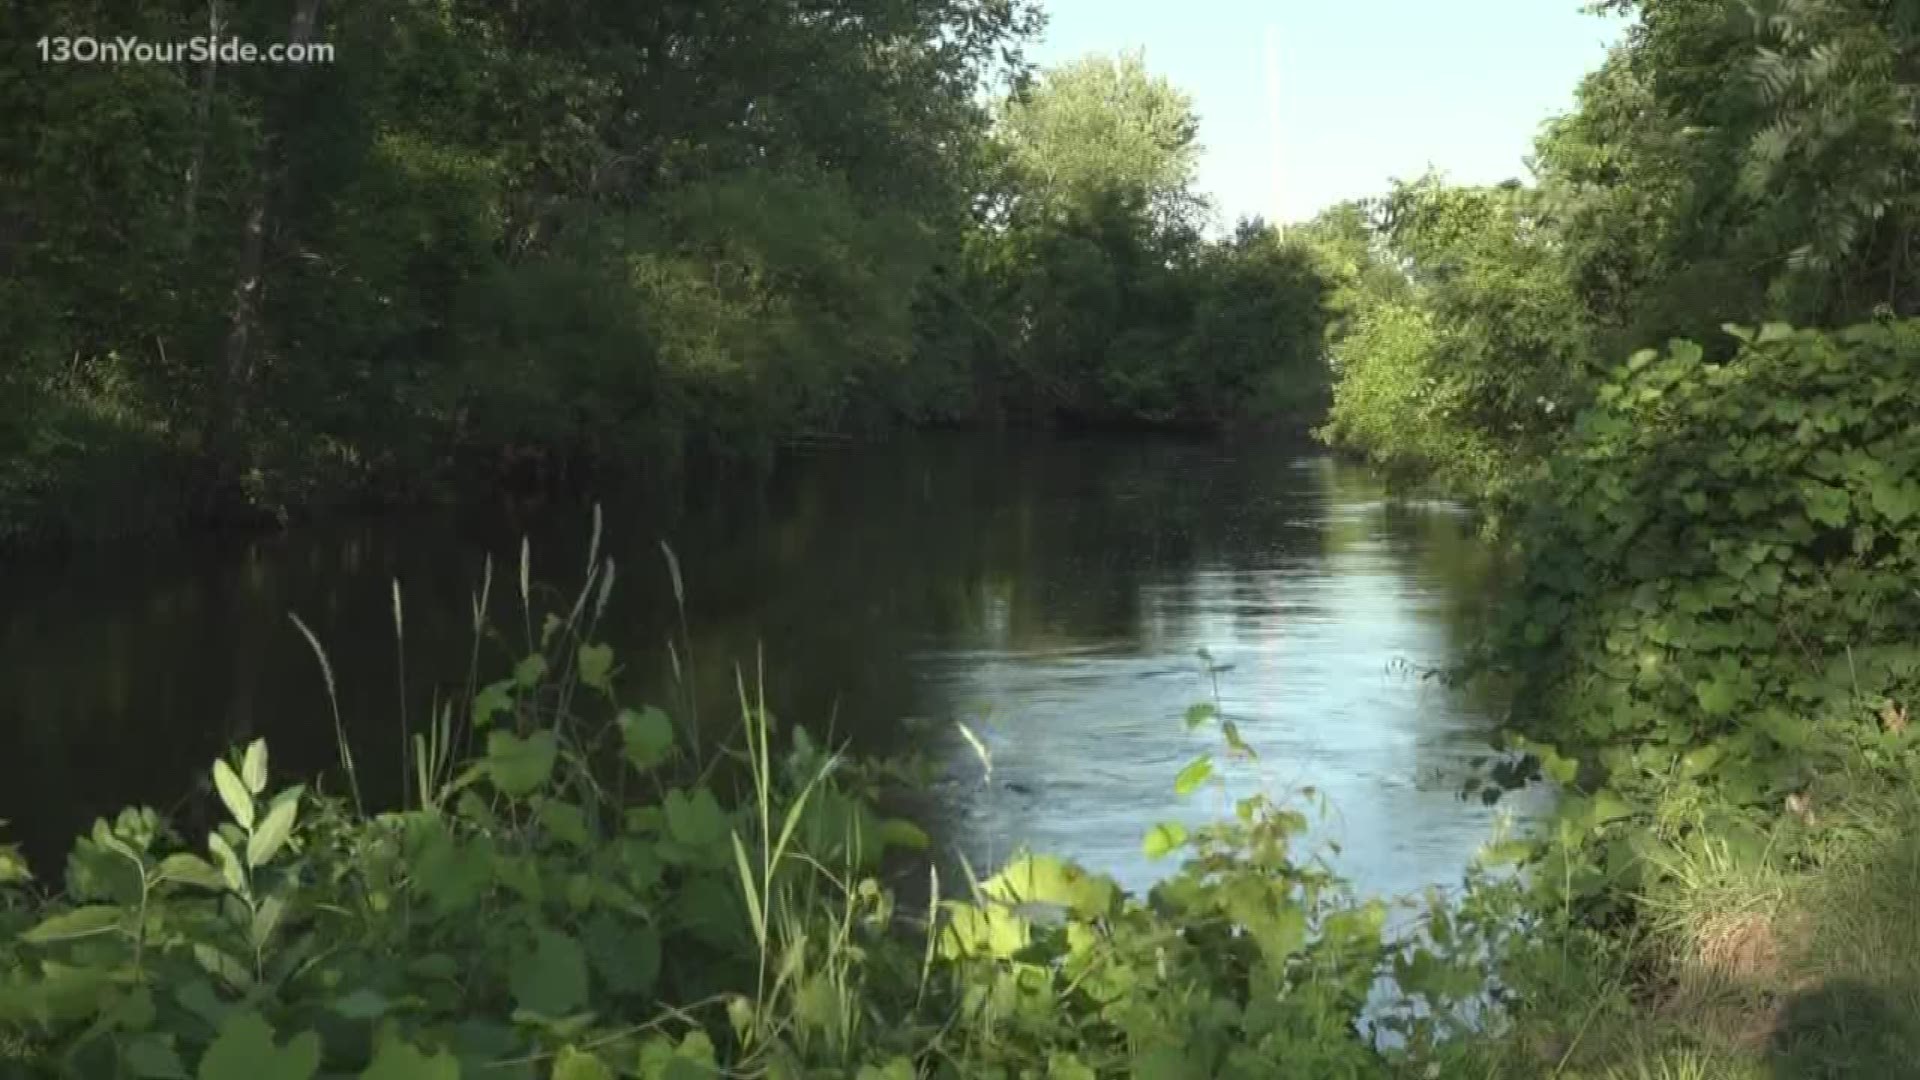 Police warn people to stay off Thornapple River because of conditions